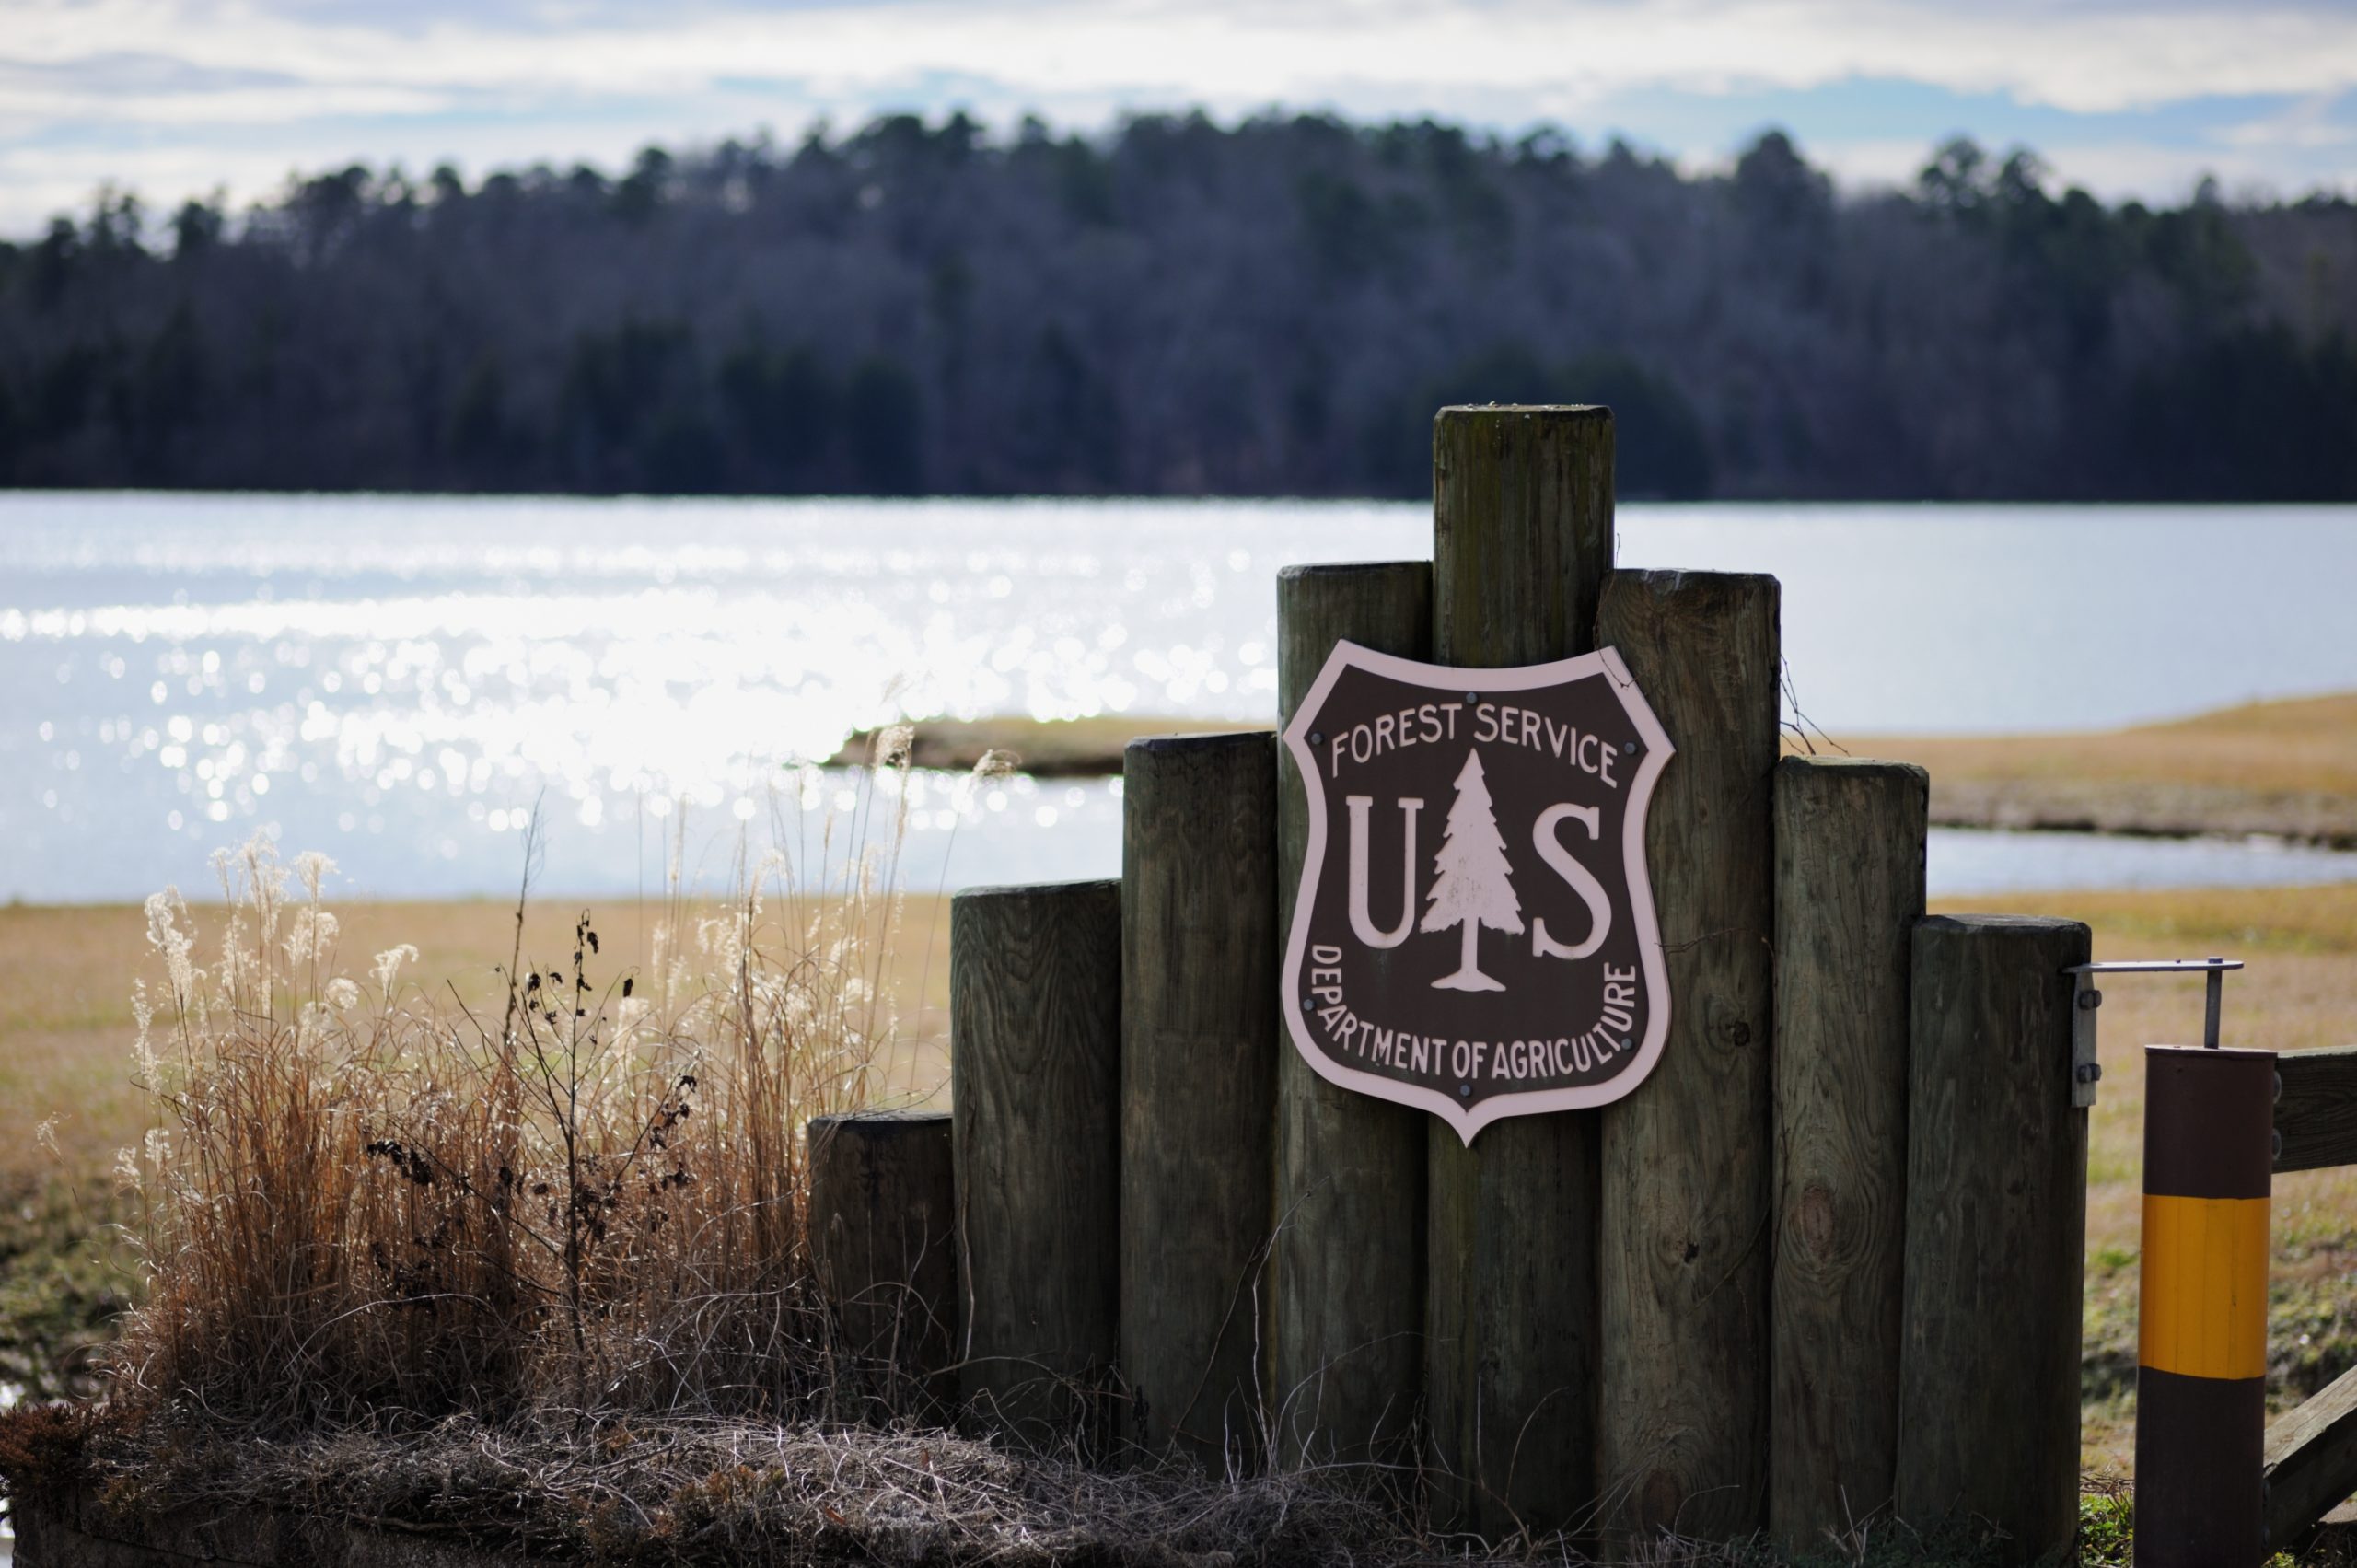 United States Forest Service sign on a wooden fence by water.